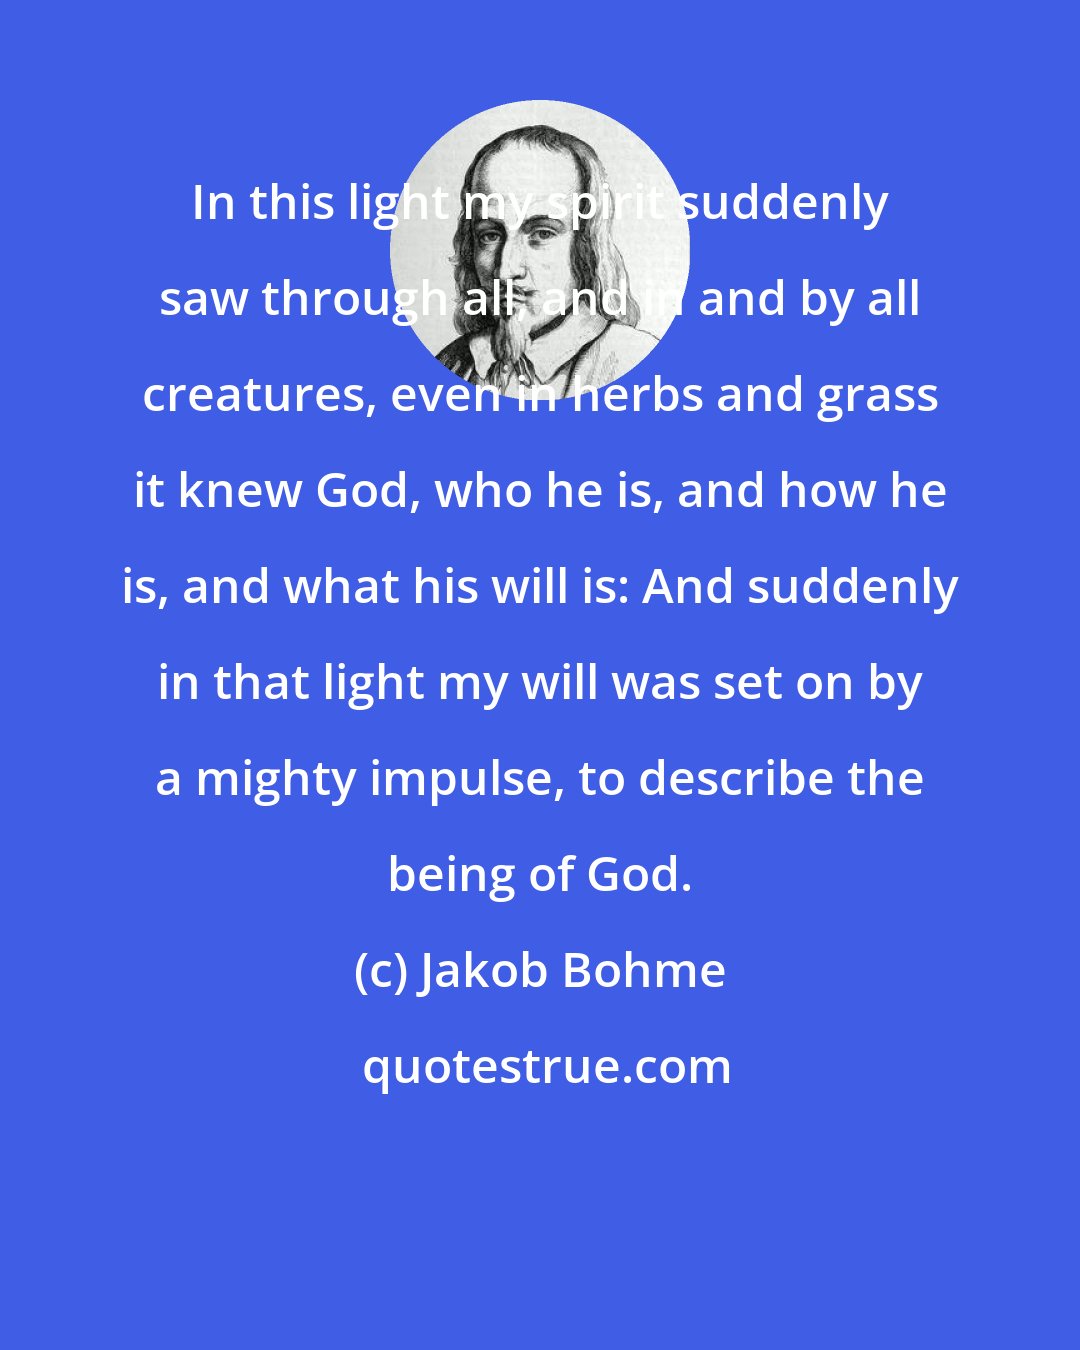 Jakob Bohme: In this light my spirit suddenly saw through all, and in and by all creatures, even in herbs and grass it knew God, who he is, and how he is, and what his will is: And suddenly in that light my will was set on by a mighty impulse, to describe the being of God.